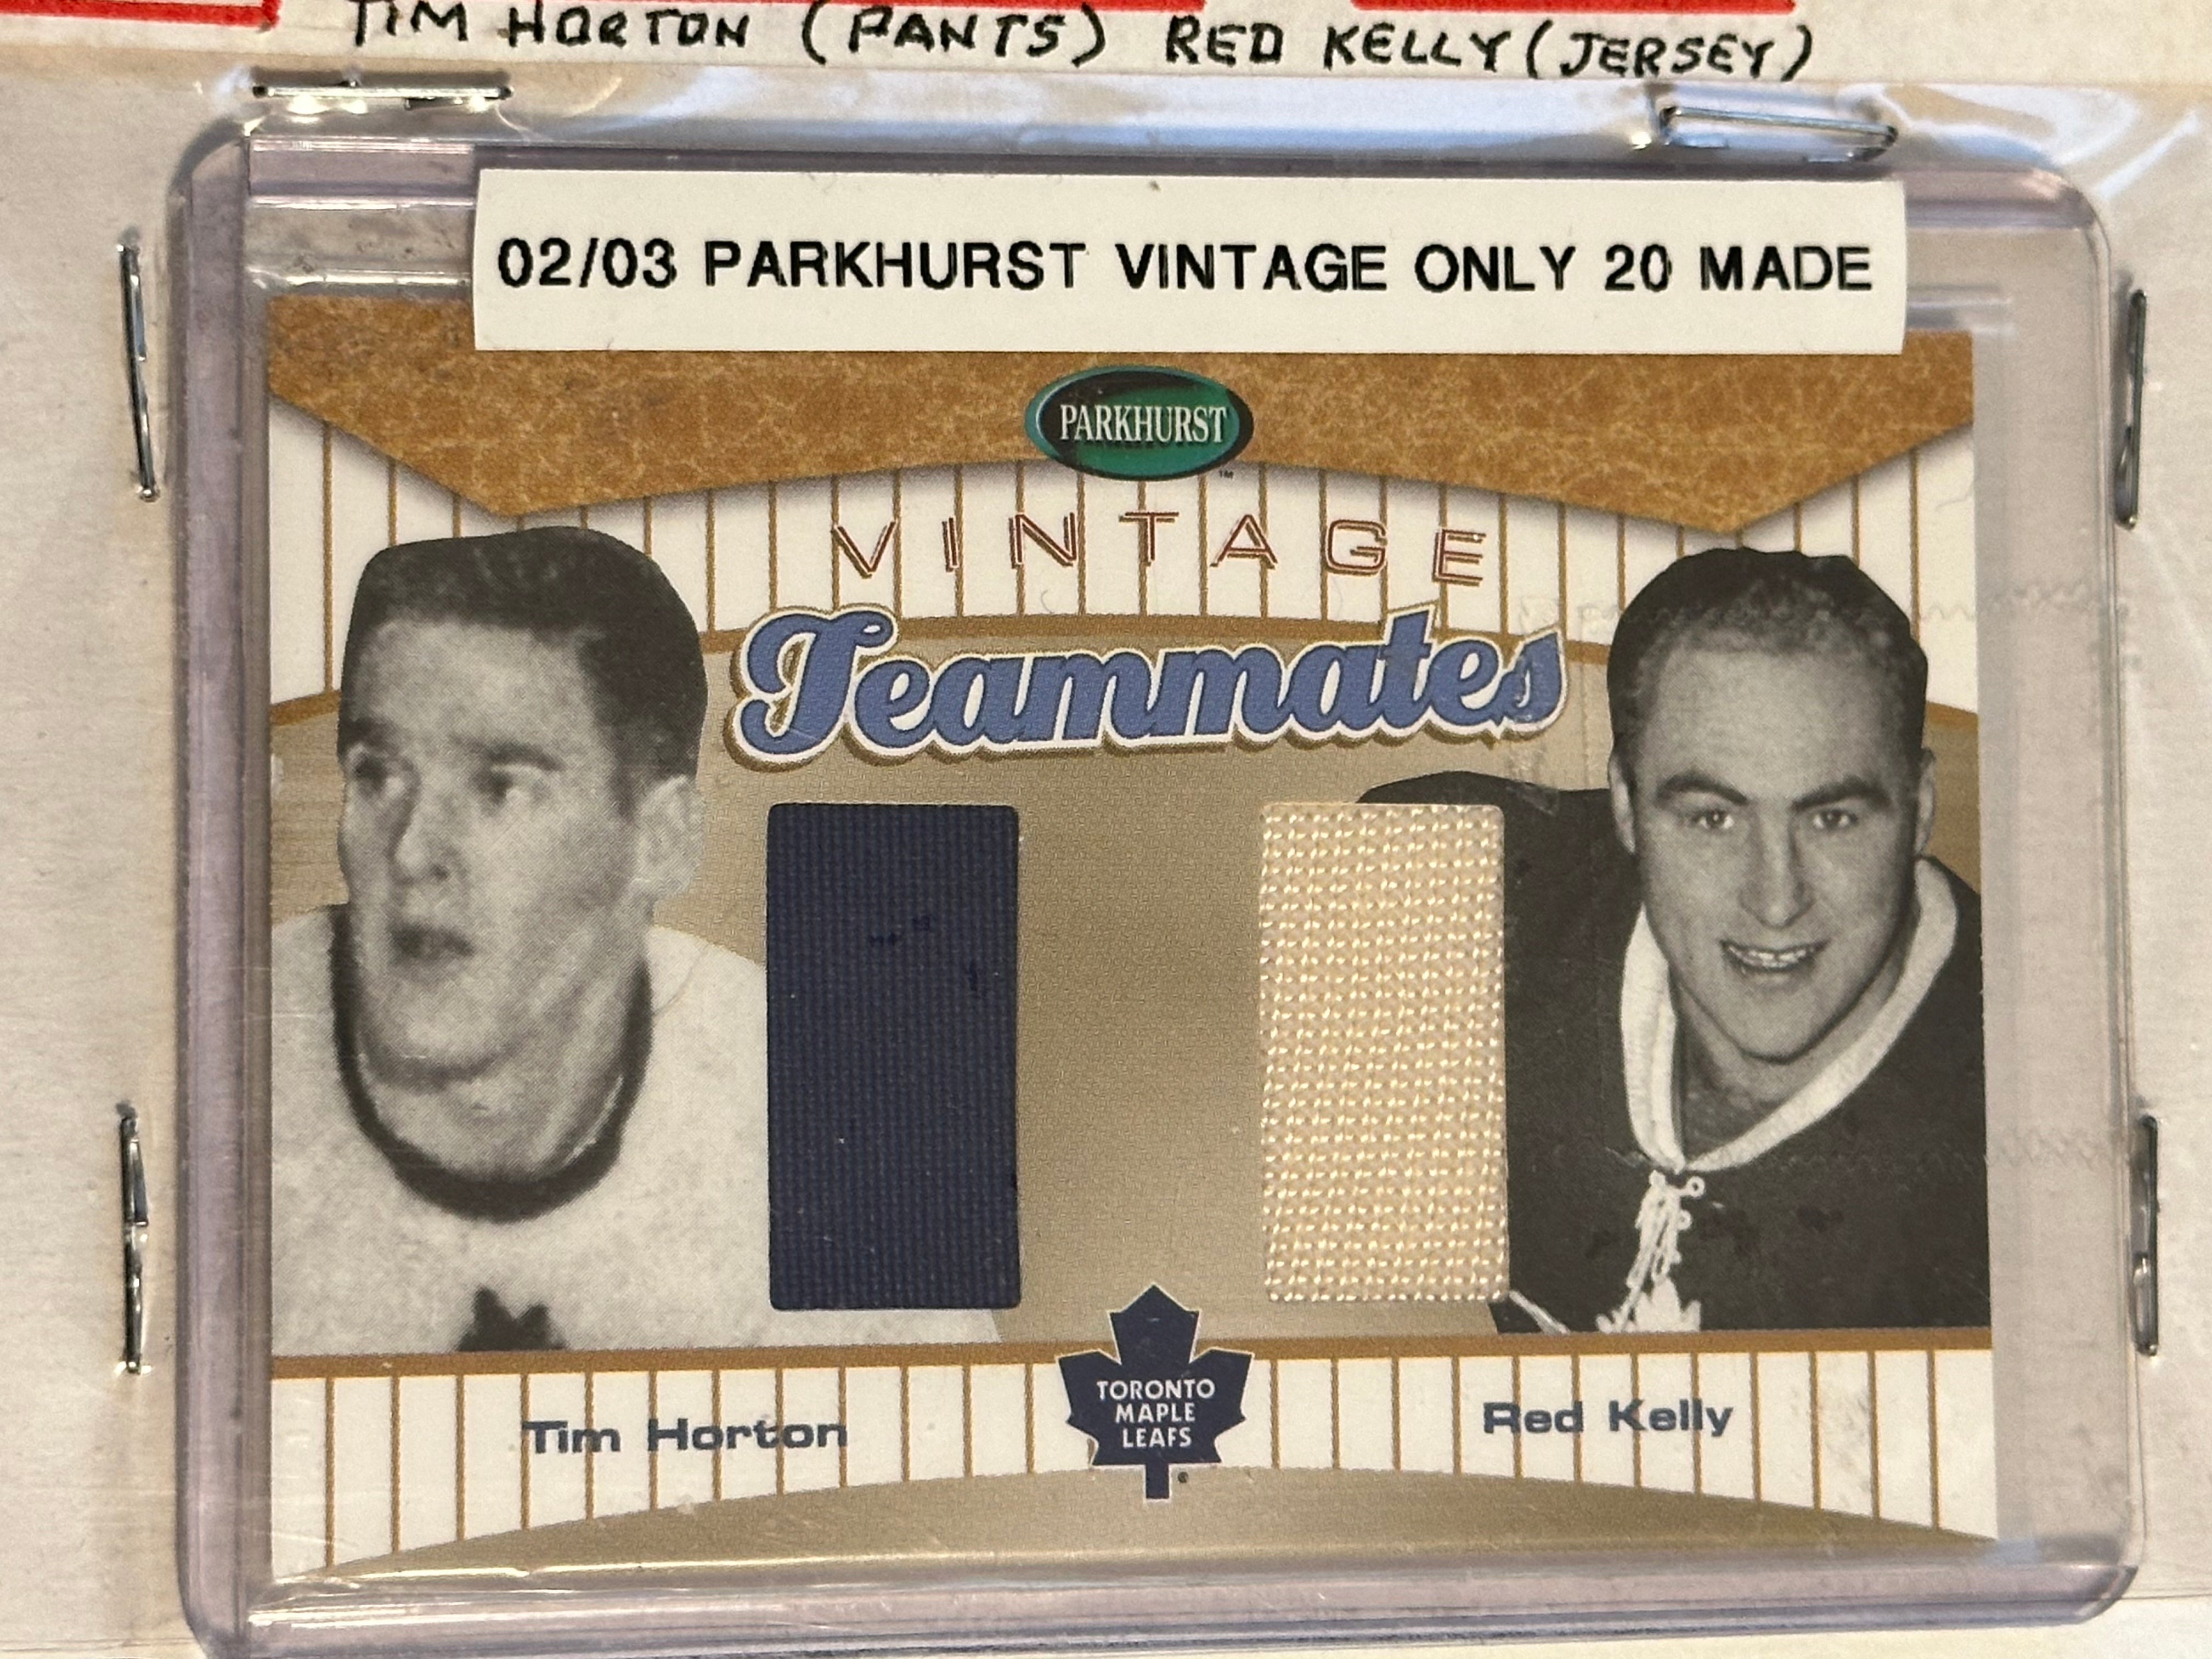 Tim Horton and Red Kelly rare double memorabilia hockey insert card 2002/03 (only 20)